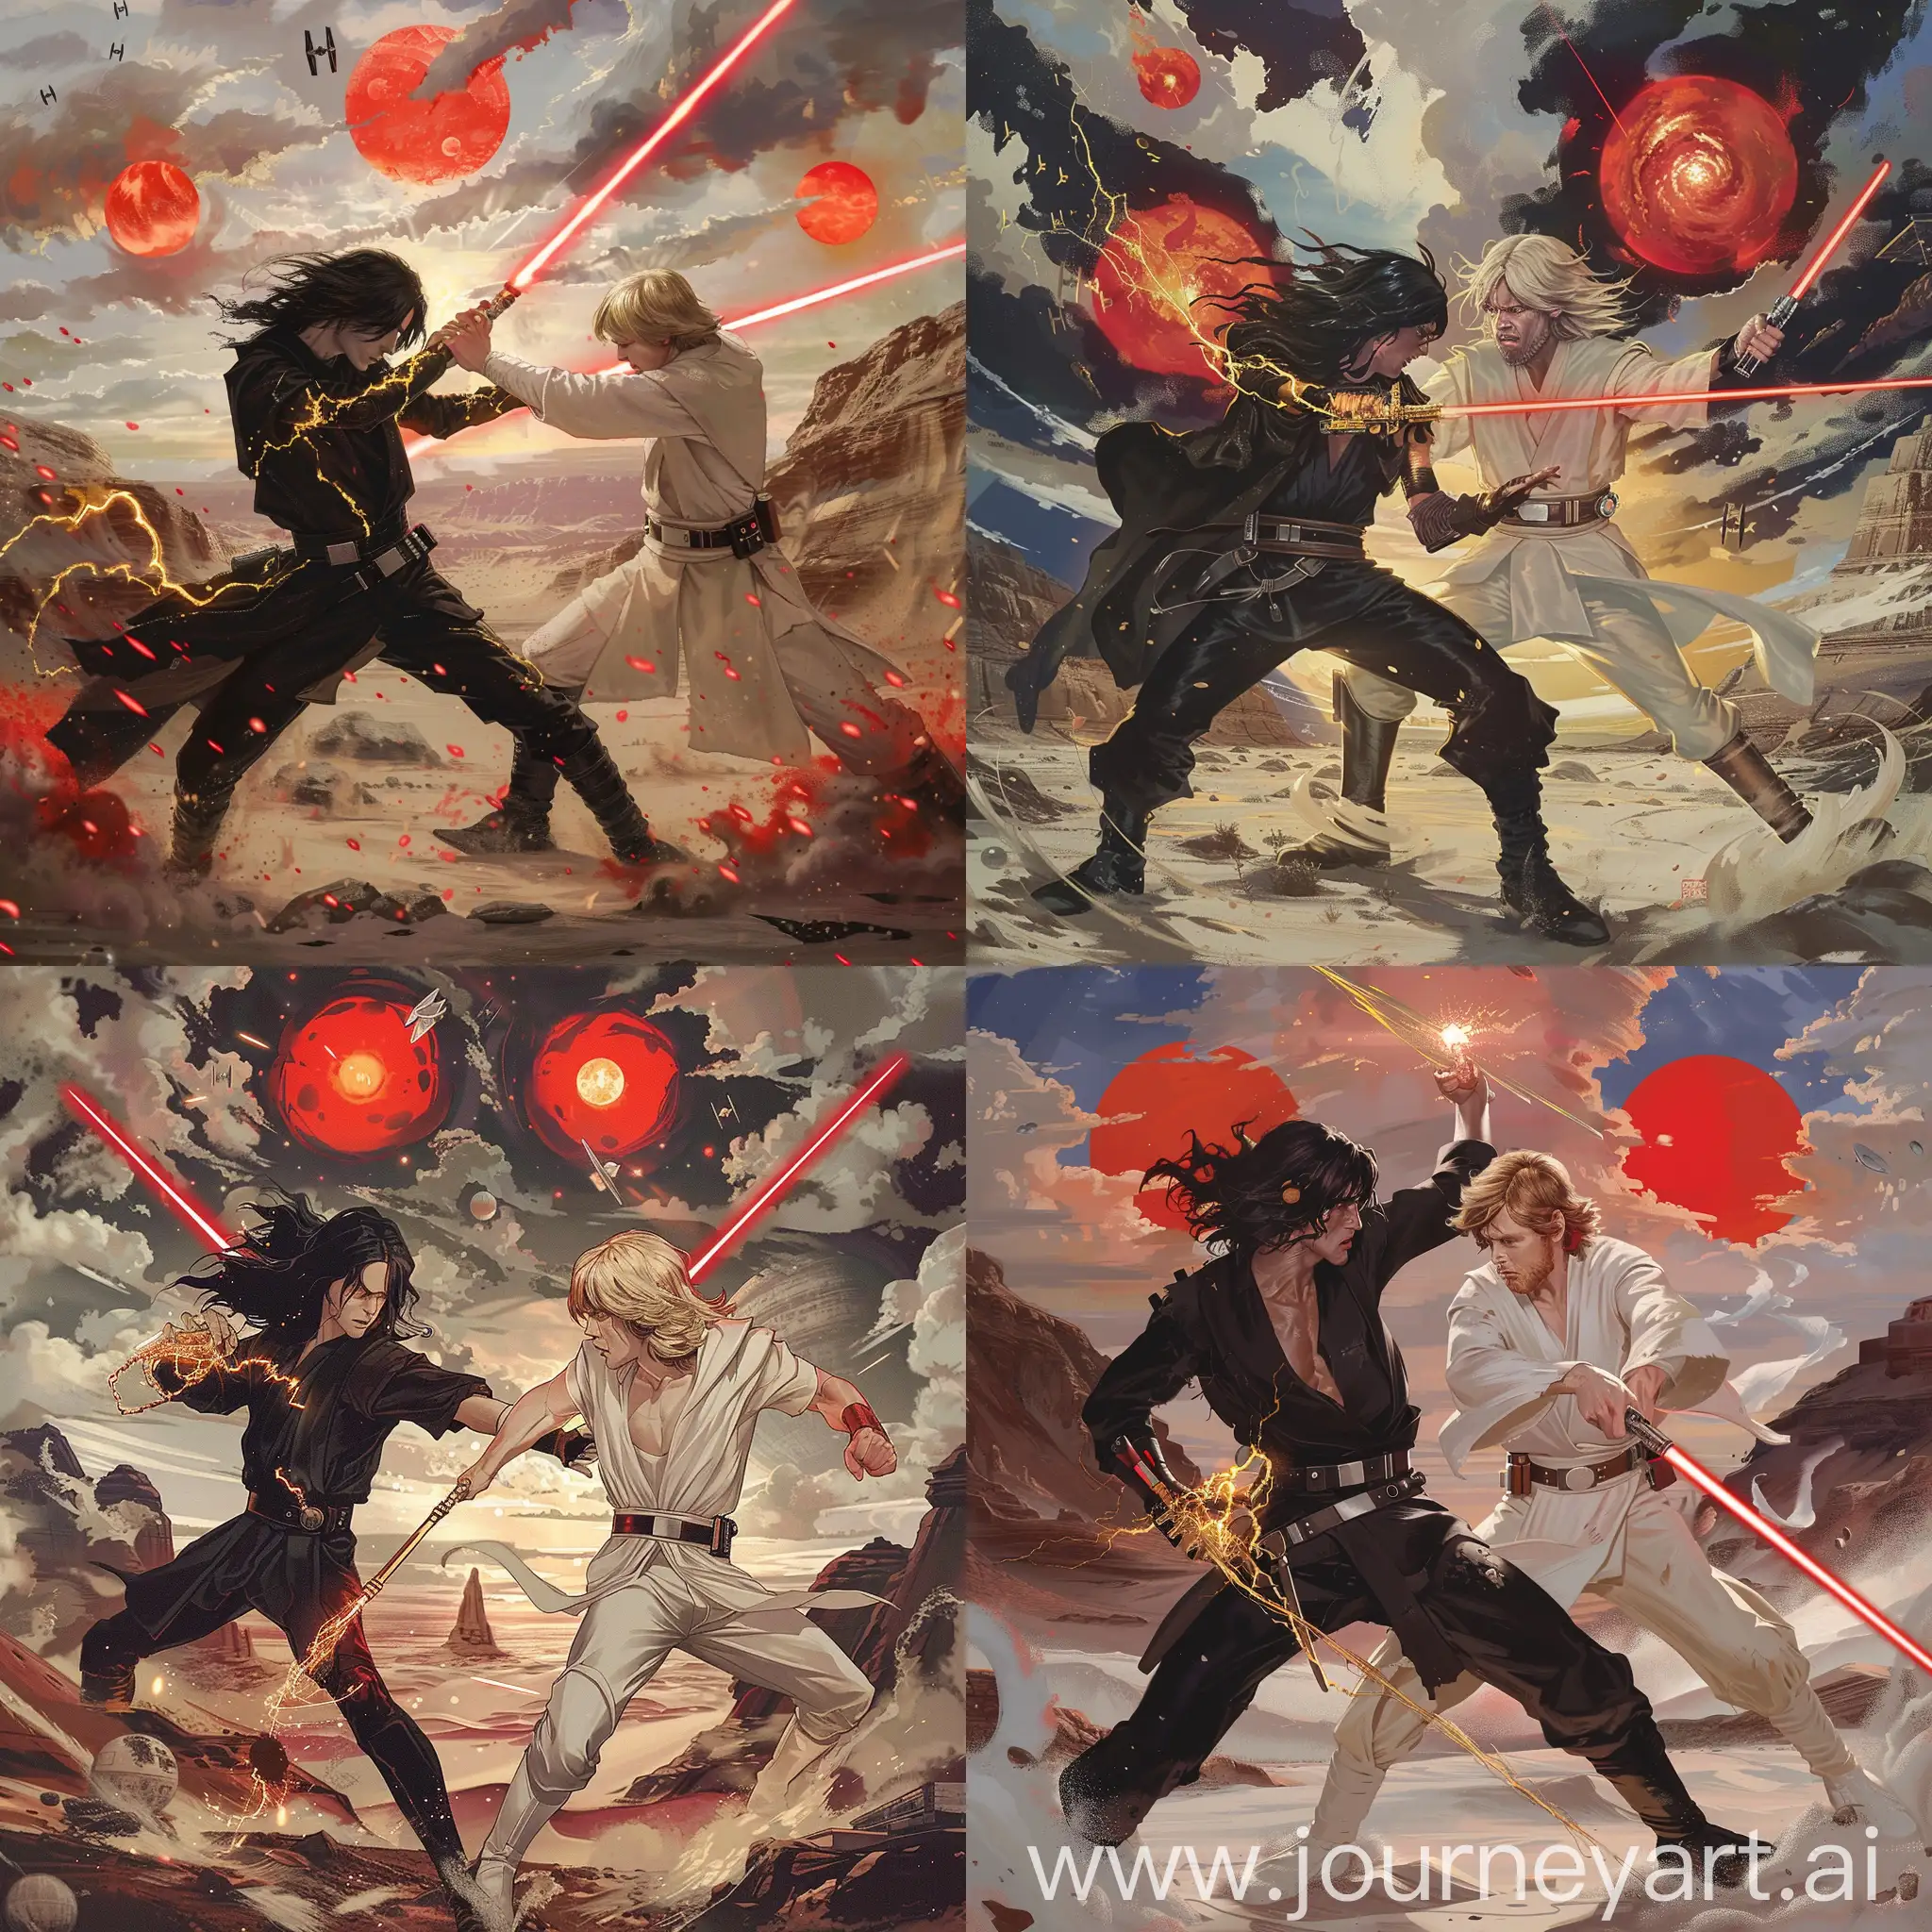 at the left side, here is a black mid-long hair Paul Atréides, he is in black clothes, he holds a golden electric blade,

at the right side, there is a blond mid-long hair Luke Skywalker, he is in white clothes, he holds a red laser sword,

these two characters fight against each other with their weapons,

three red suns in cloudy sky, desert planet and cyclones as background,